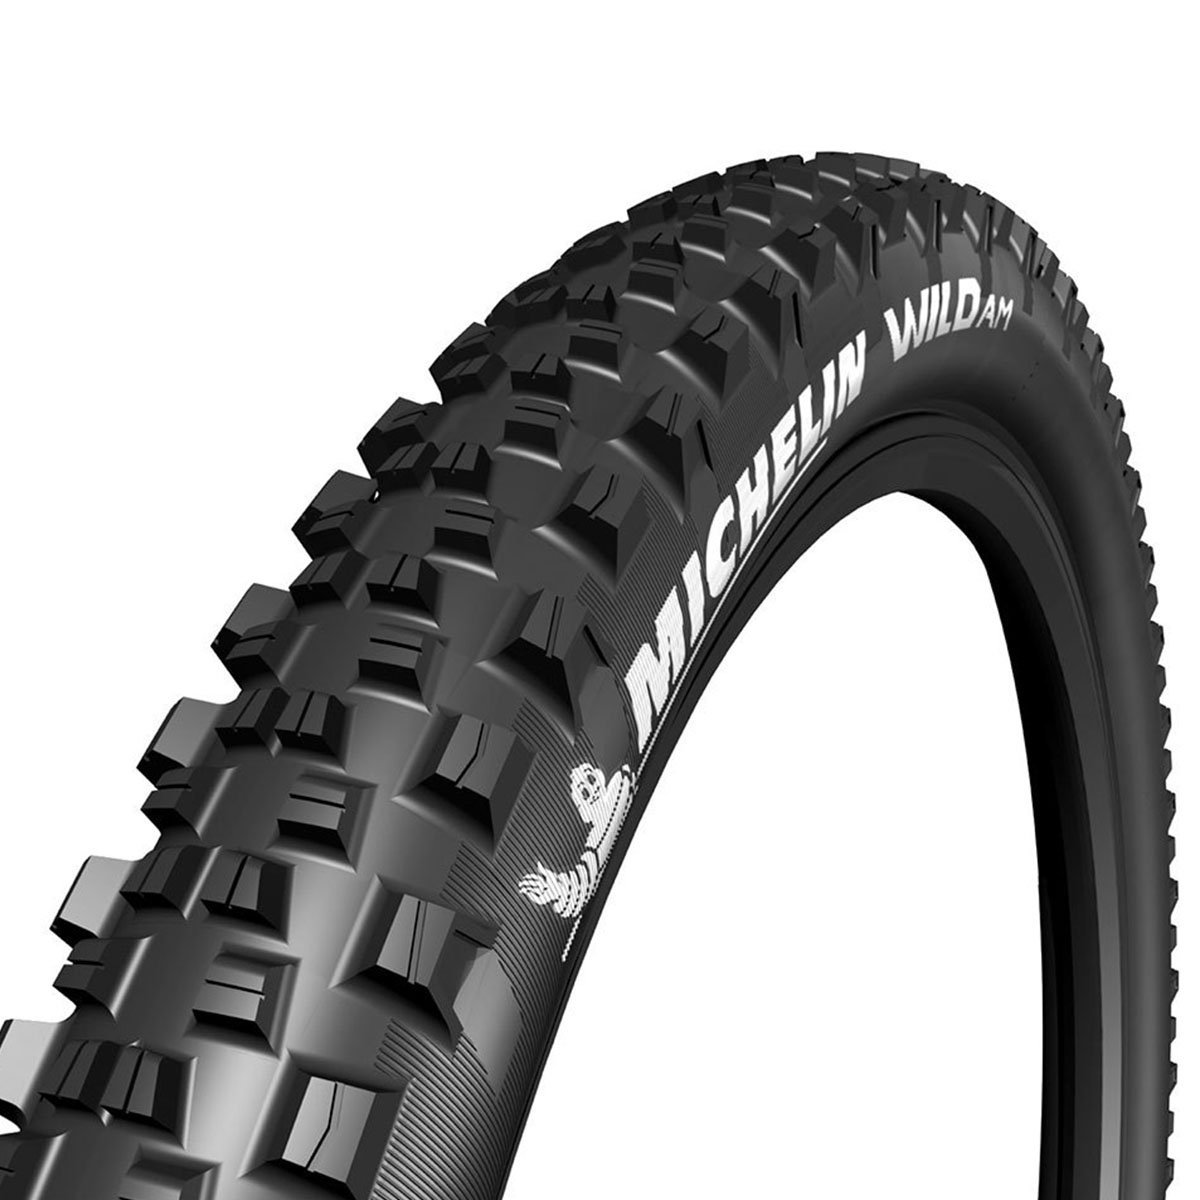 PNEU MICHELIN 29X2.35 WILD AM COMPETITION 3X60TPI KEVLAR TLR WILD AM COMPETITION LINE